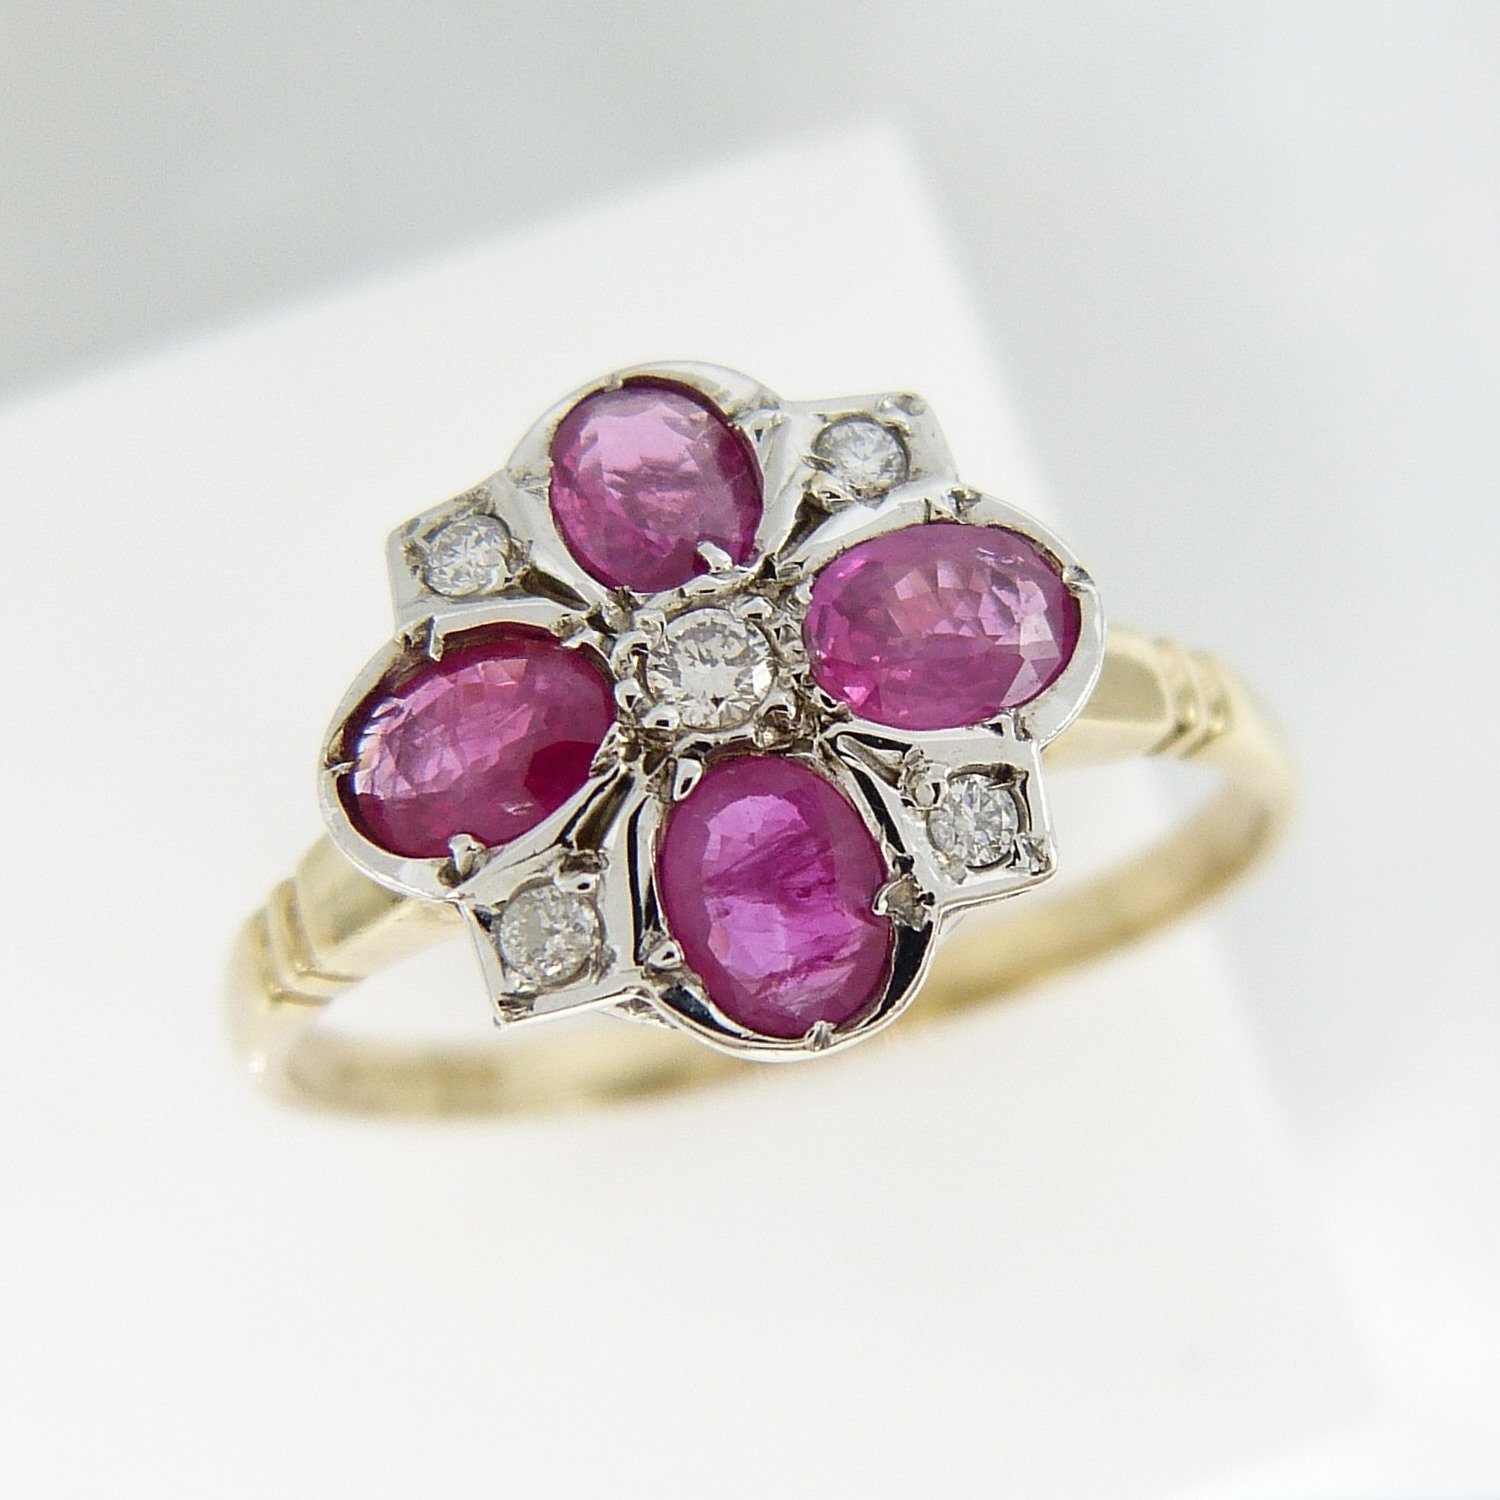 Yellow and White Gold Vintage-Style Ring Set With Rubies and Diamonds - Image 4 of 6